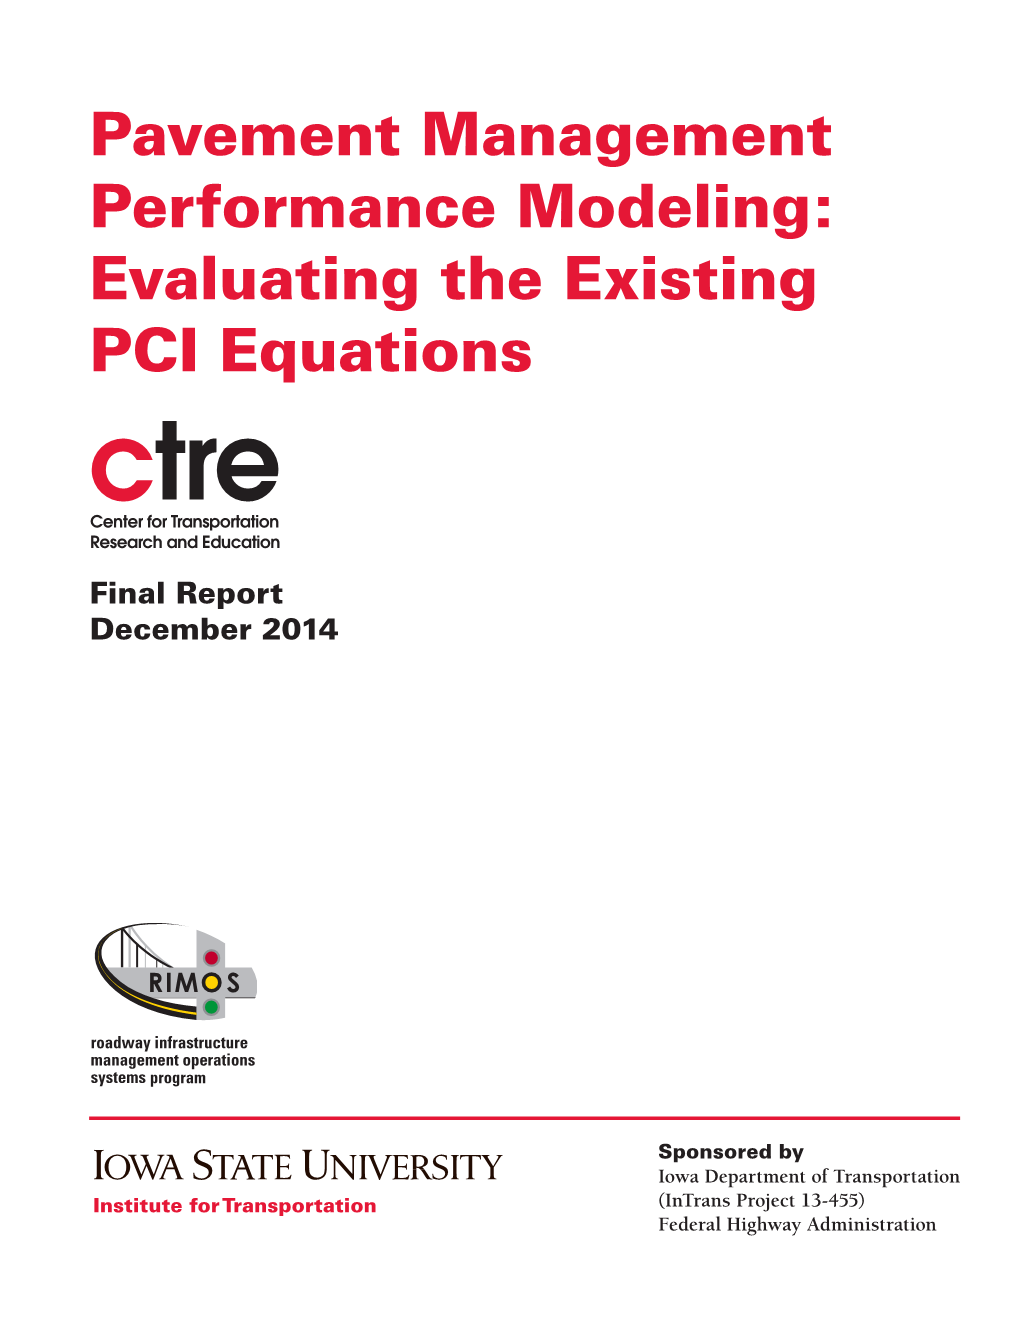 Pavement Management Performance Modeling: Evaluating the Existing PCI Equations